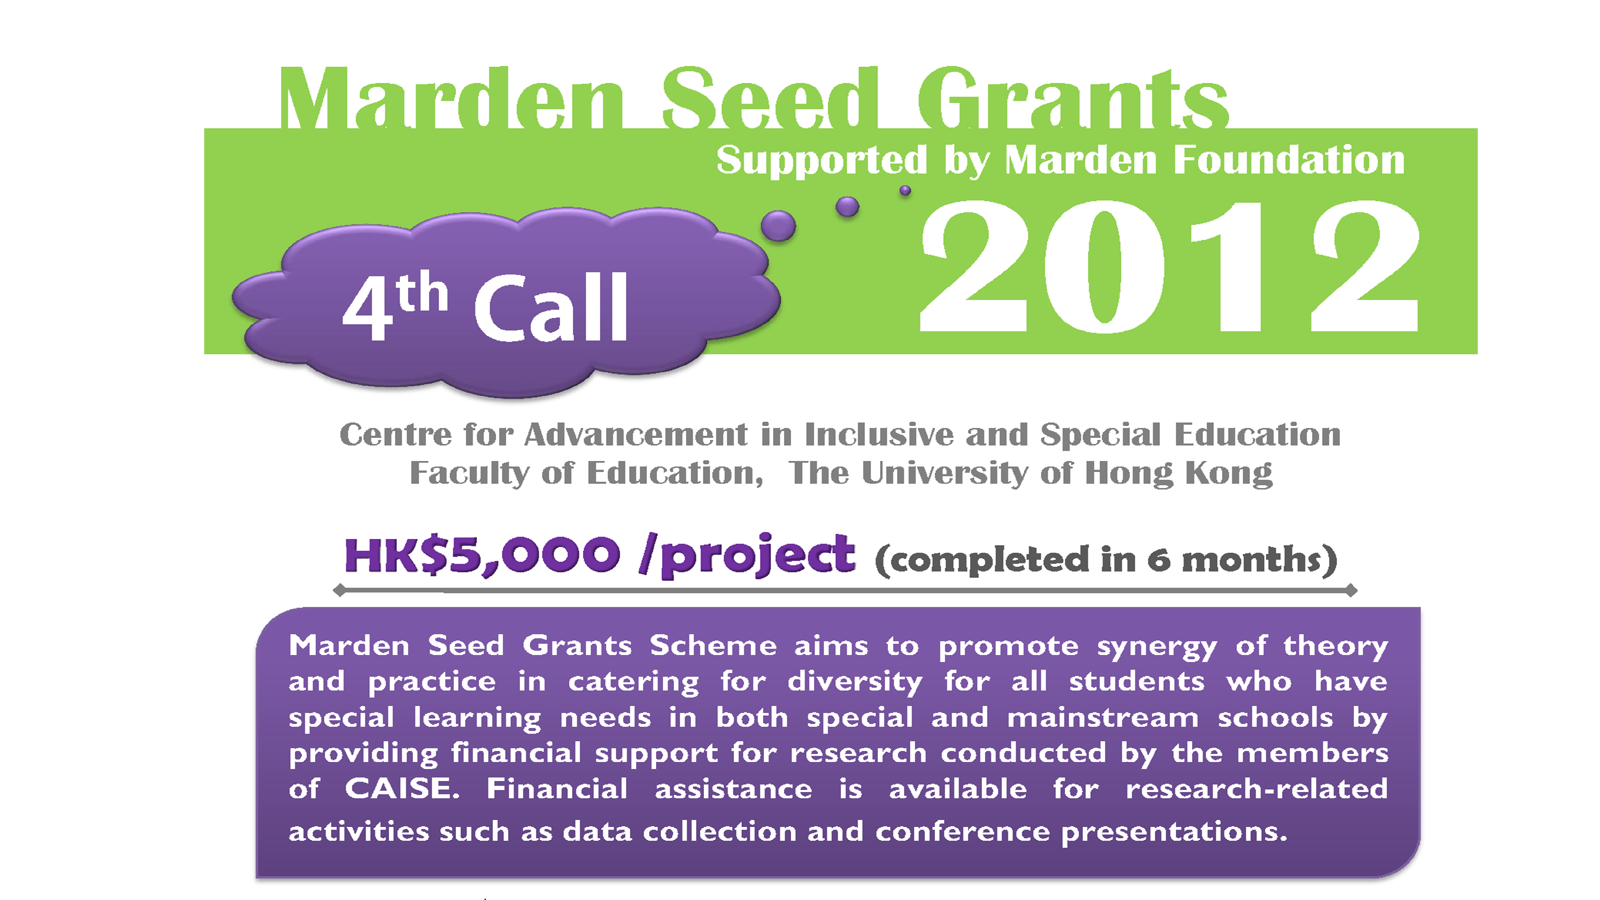 Marden Seed Grants - 4th Call by CAISE, Faculty of Education